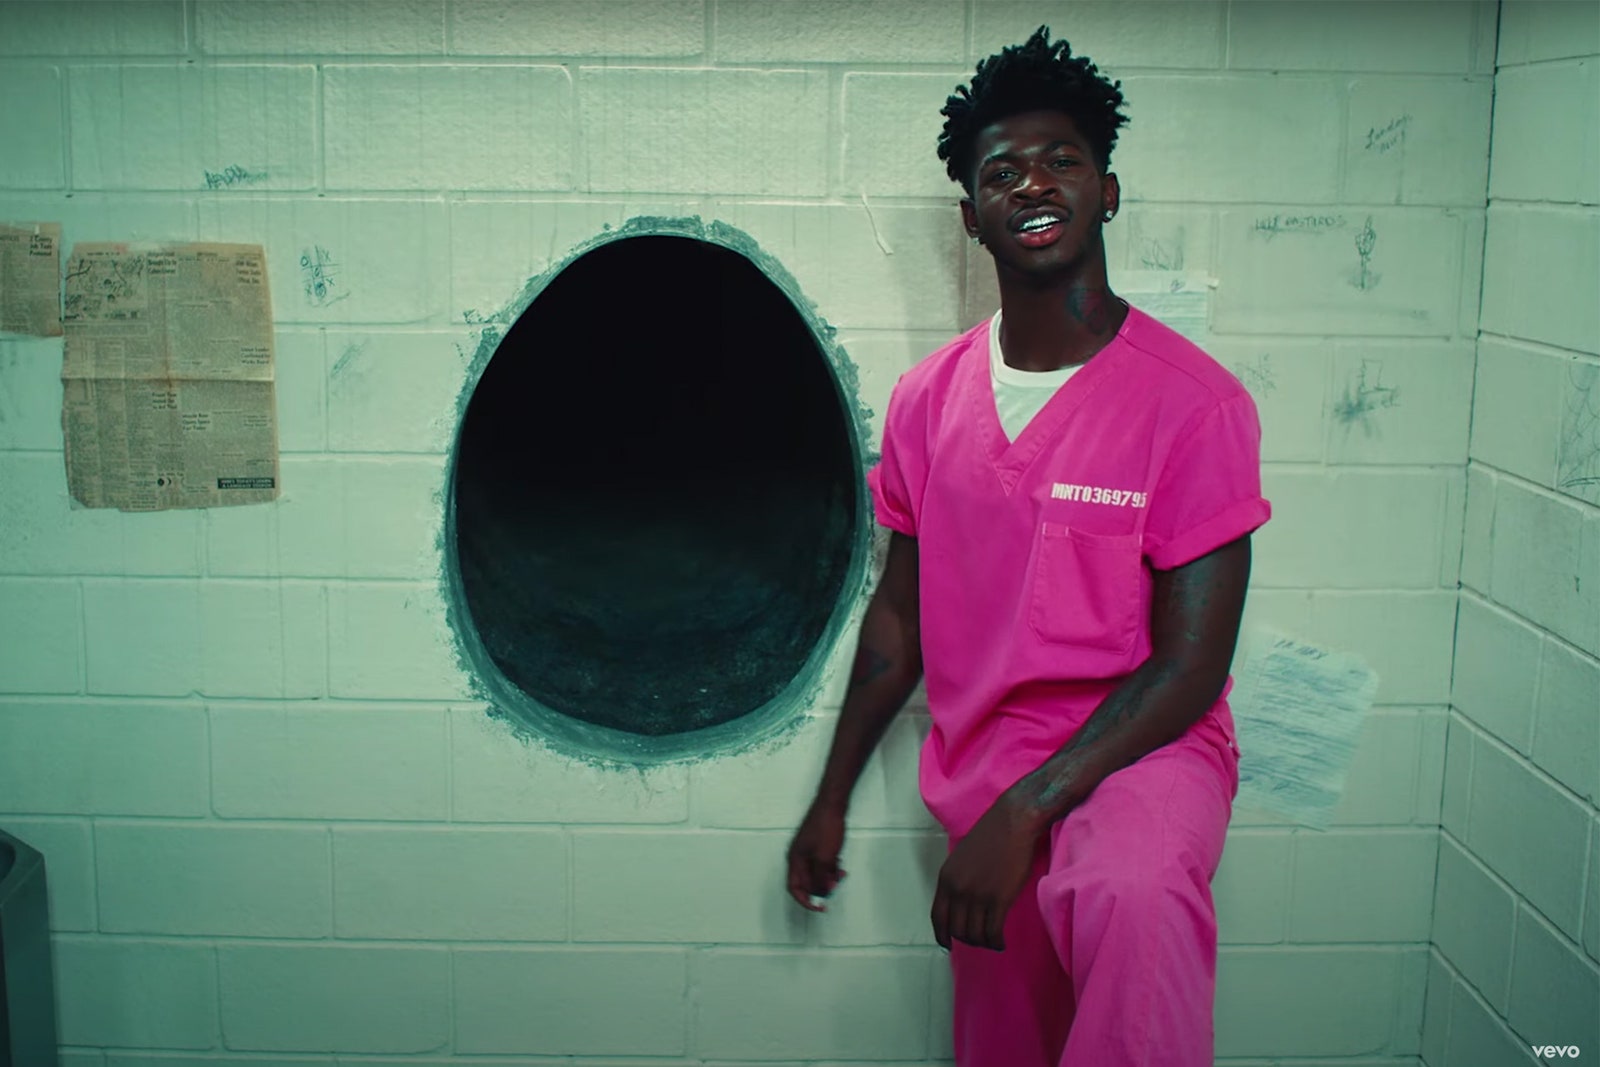 Lil Nas X has anointed 'Industry Baby Pink' the official hue of our hot boy summer